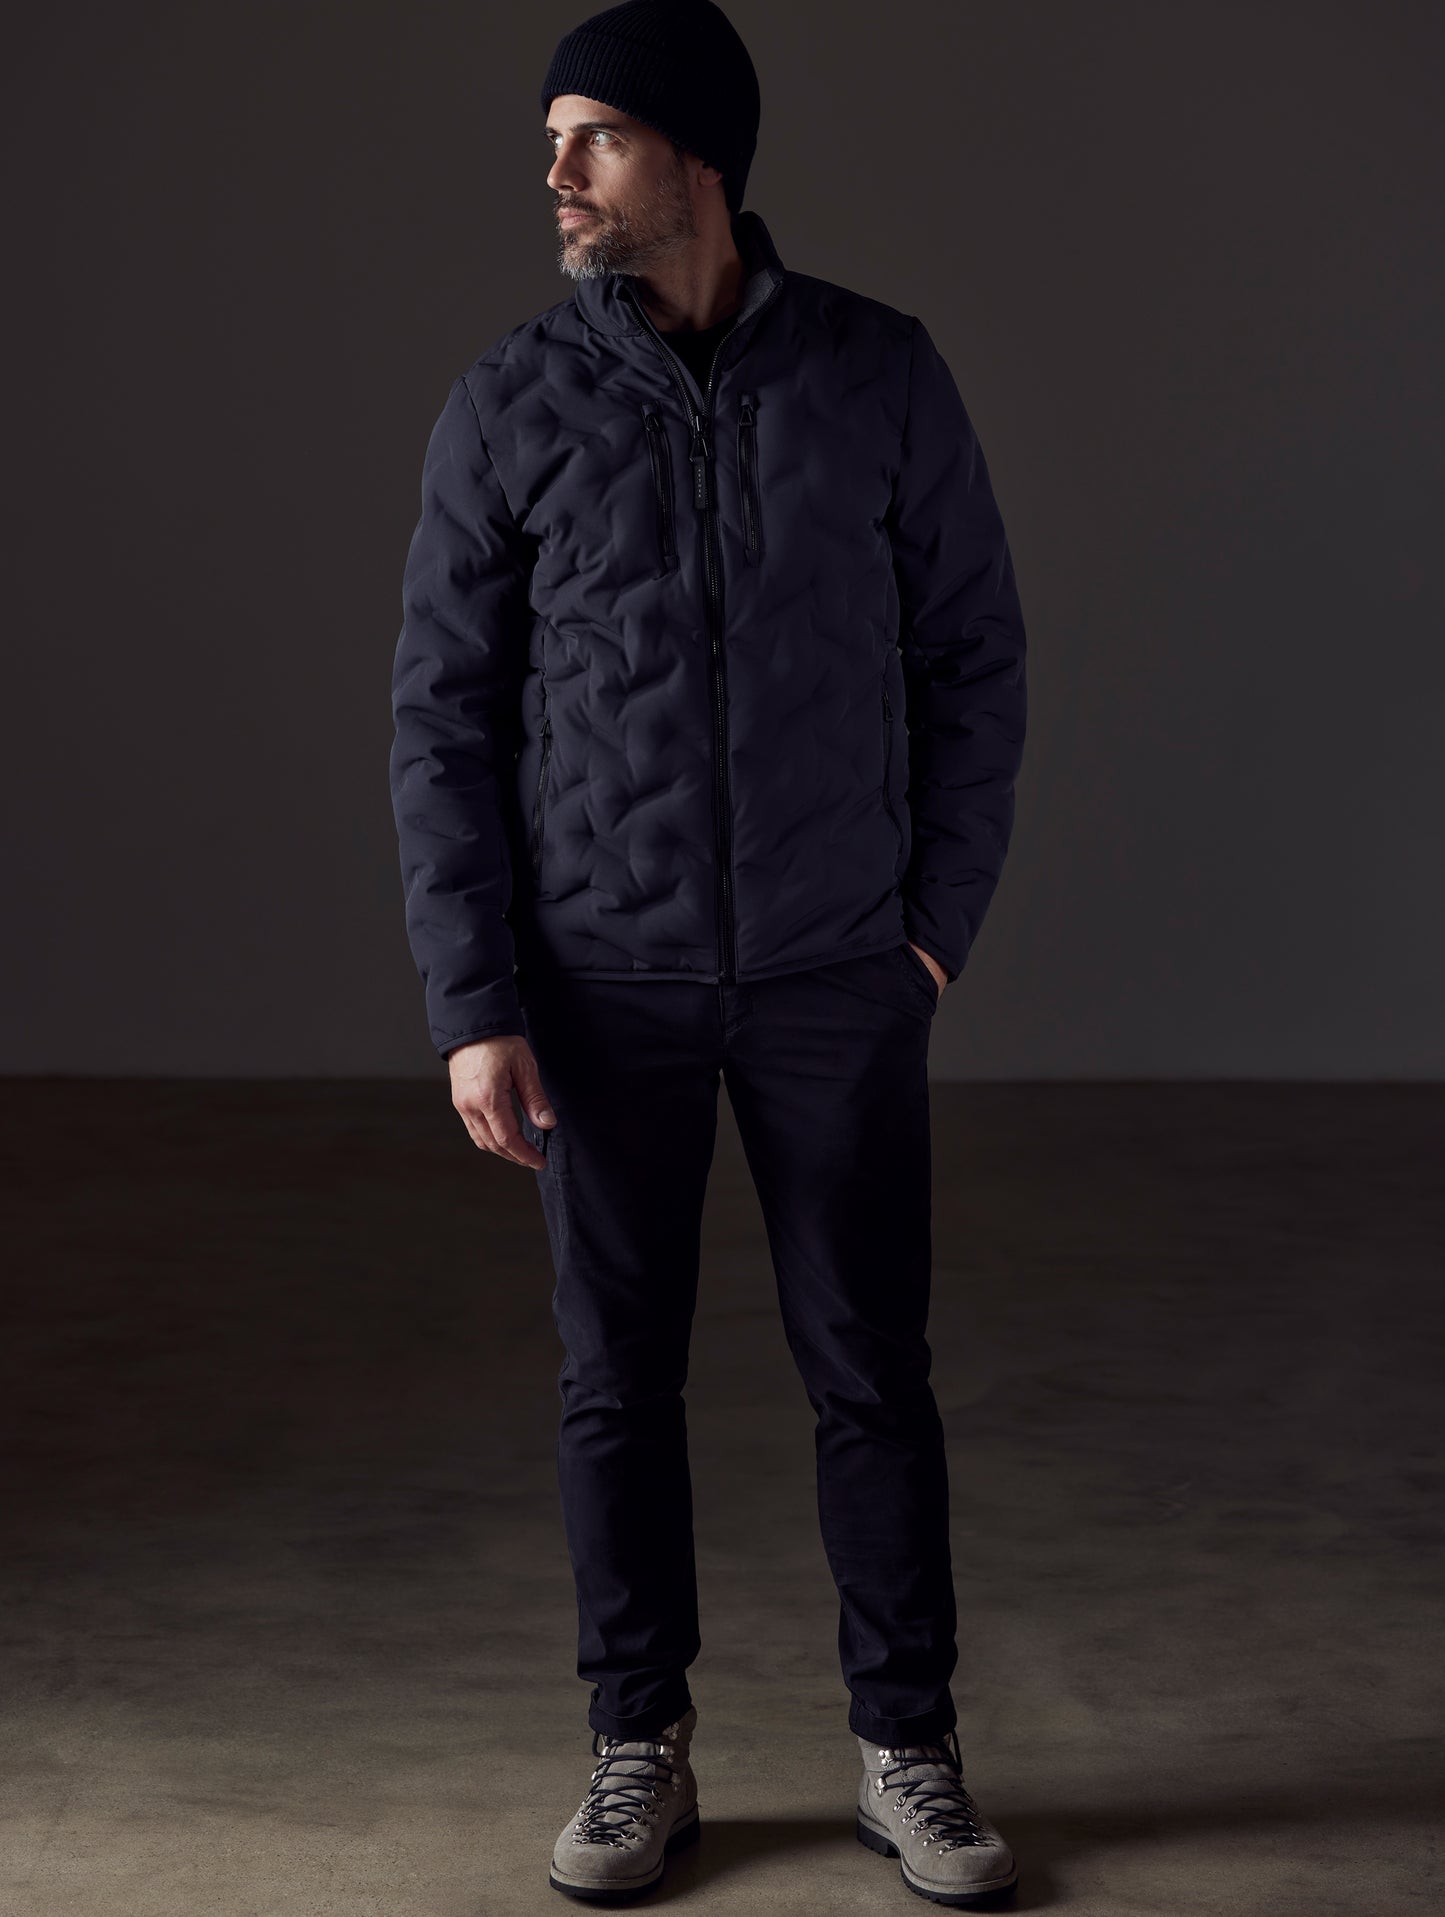 Man wearing black insulated jacket from AETHER Apparel